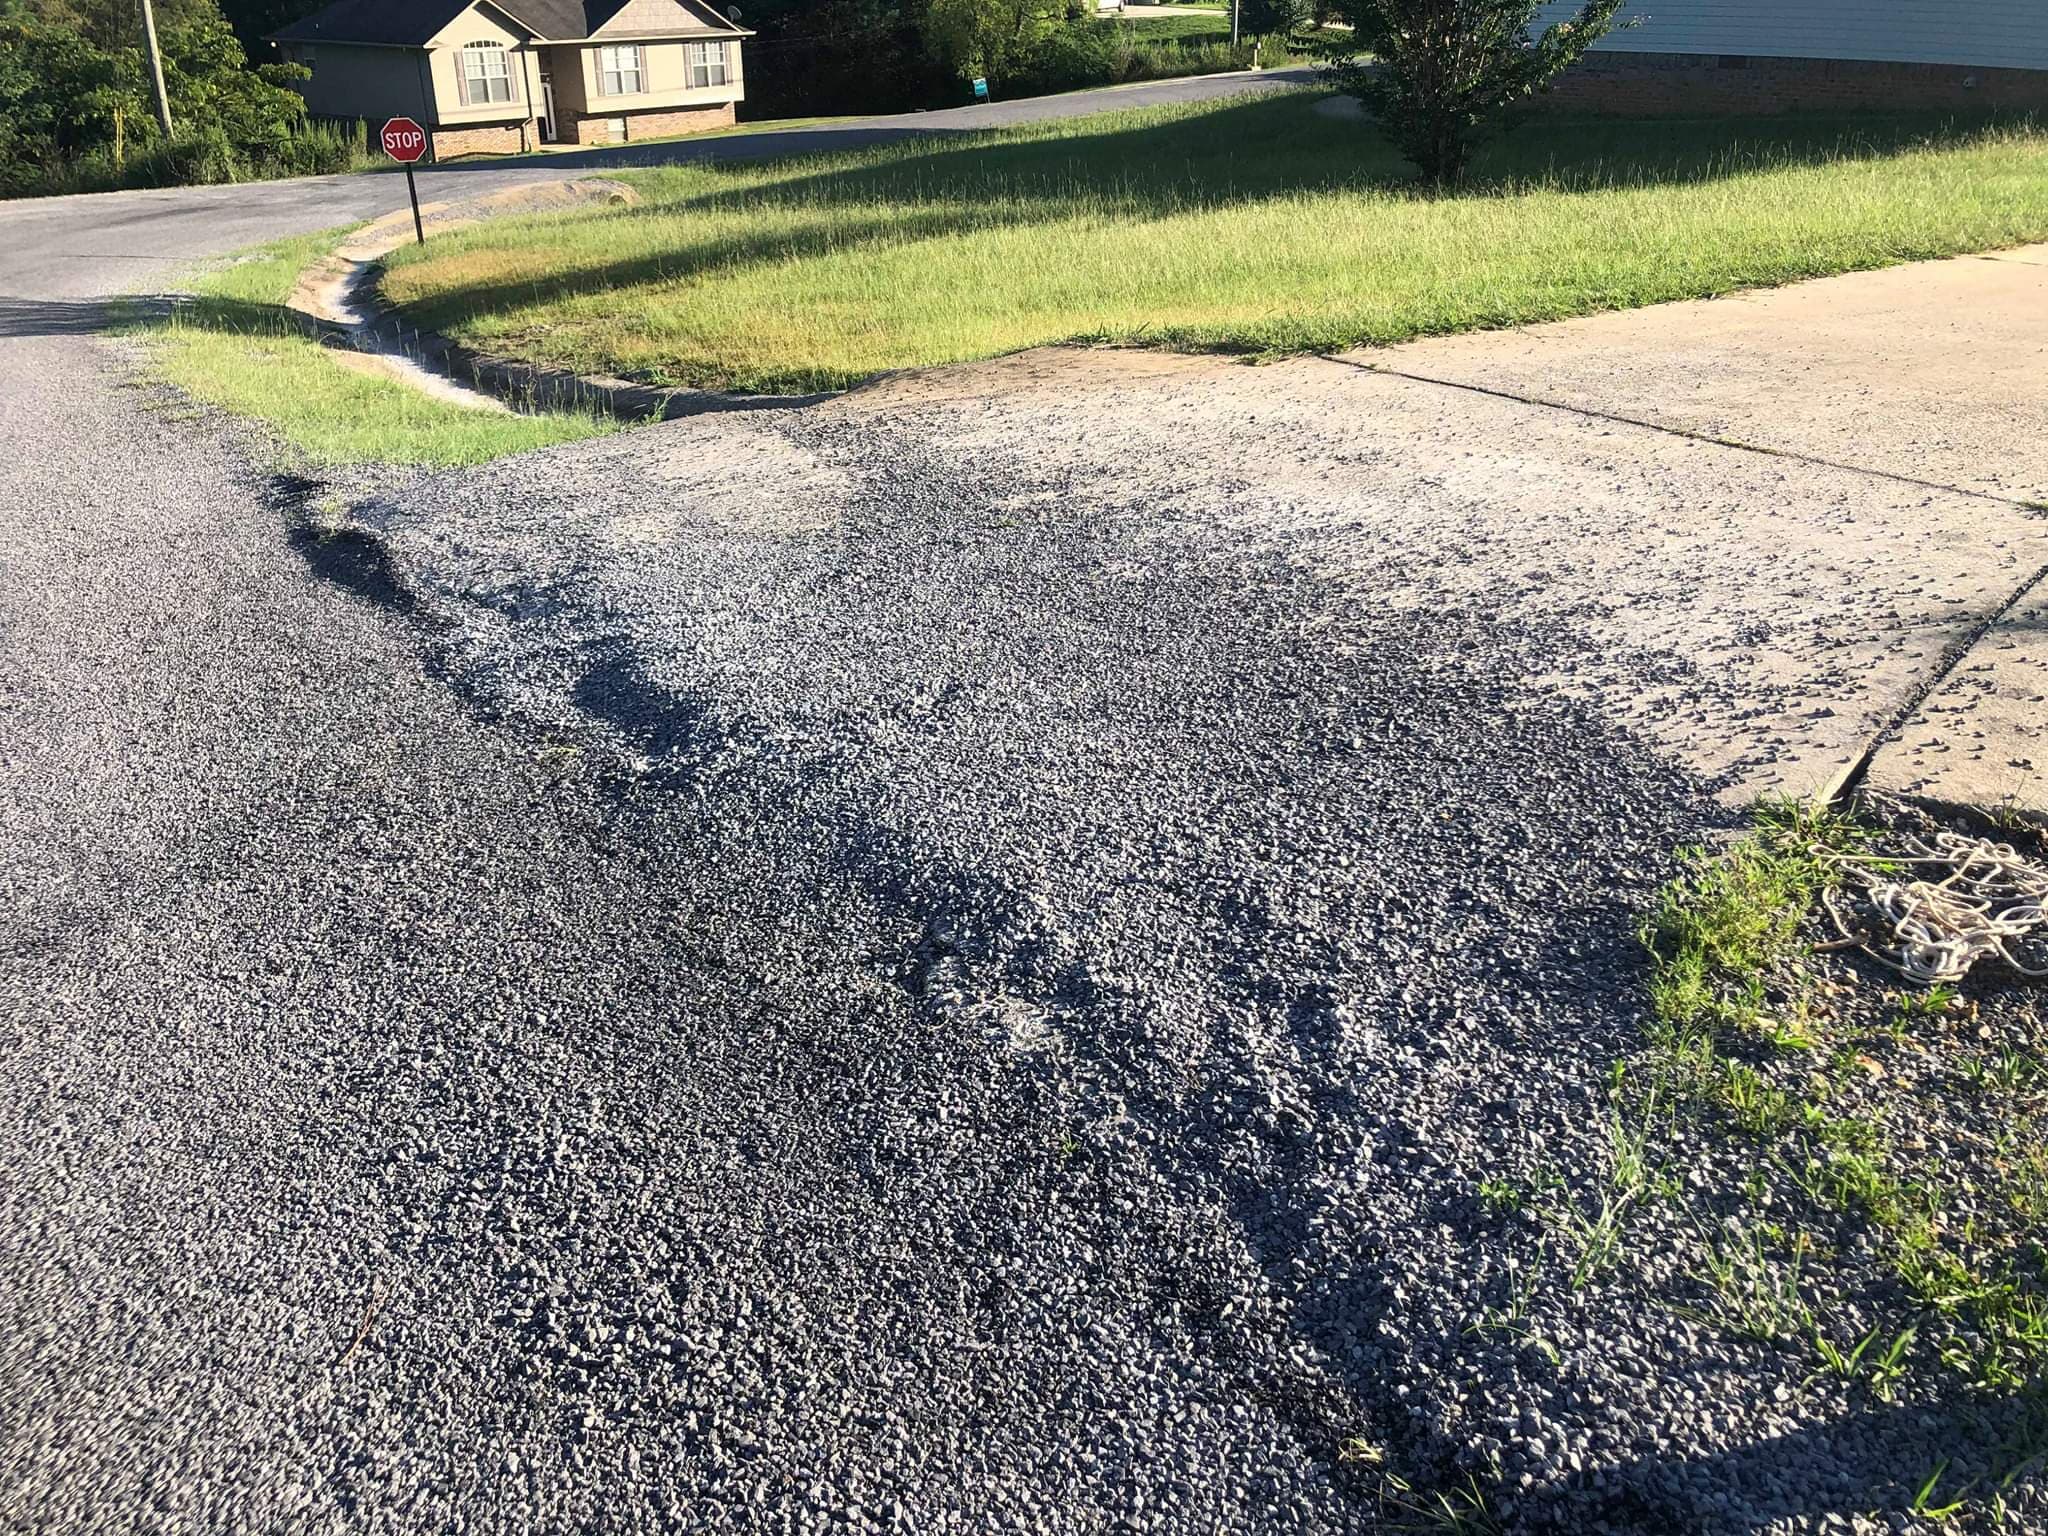 Sunrise Estates homeowners unhappy with roadwork in Margaret